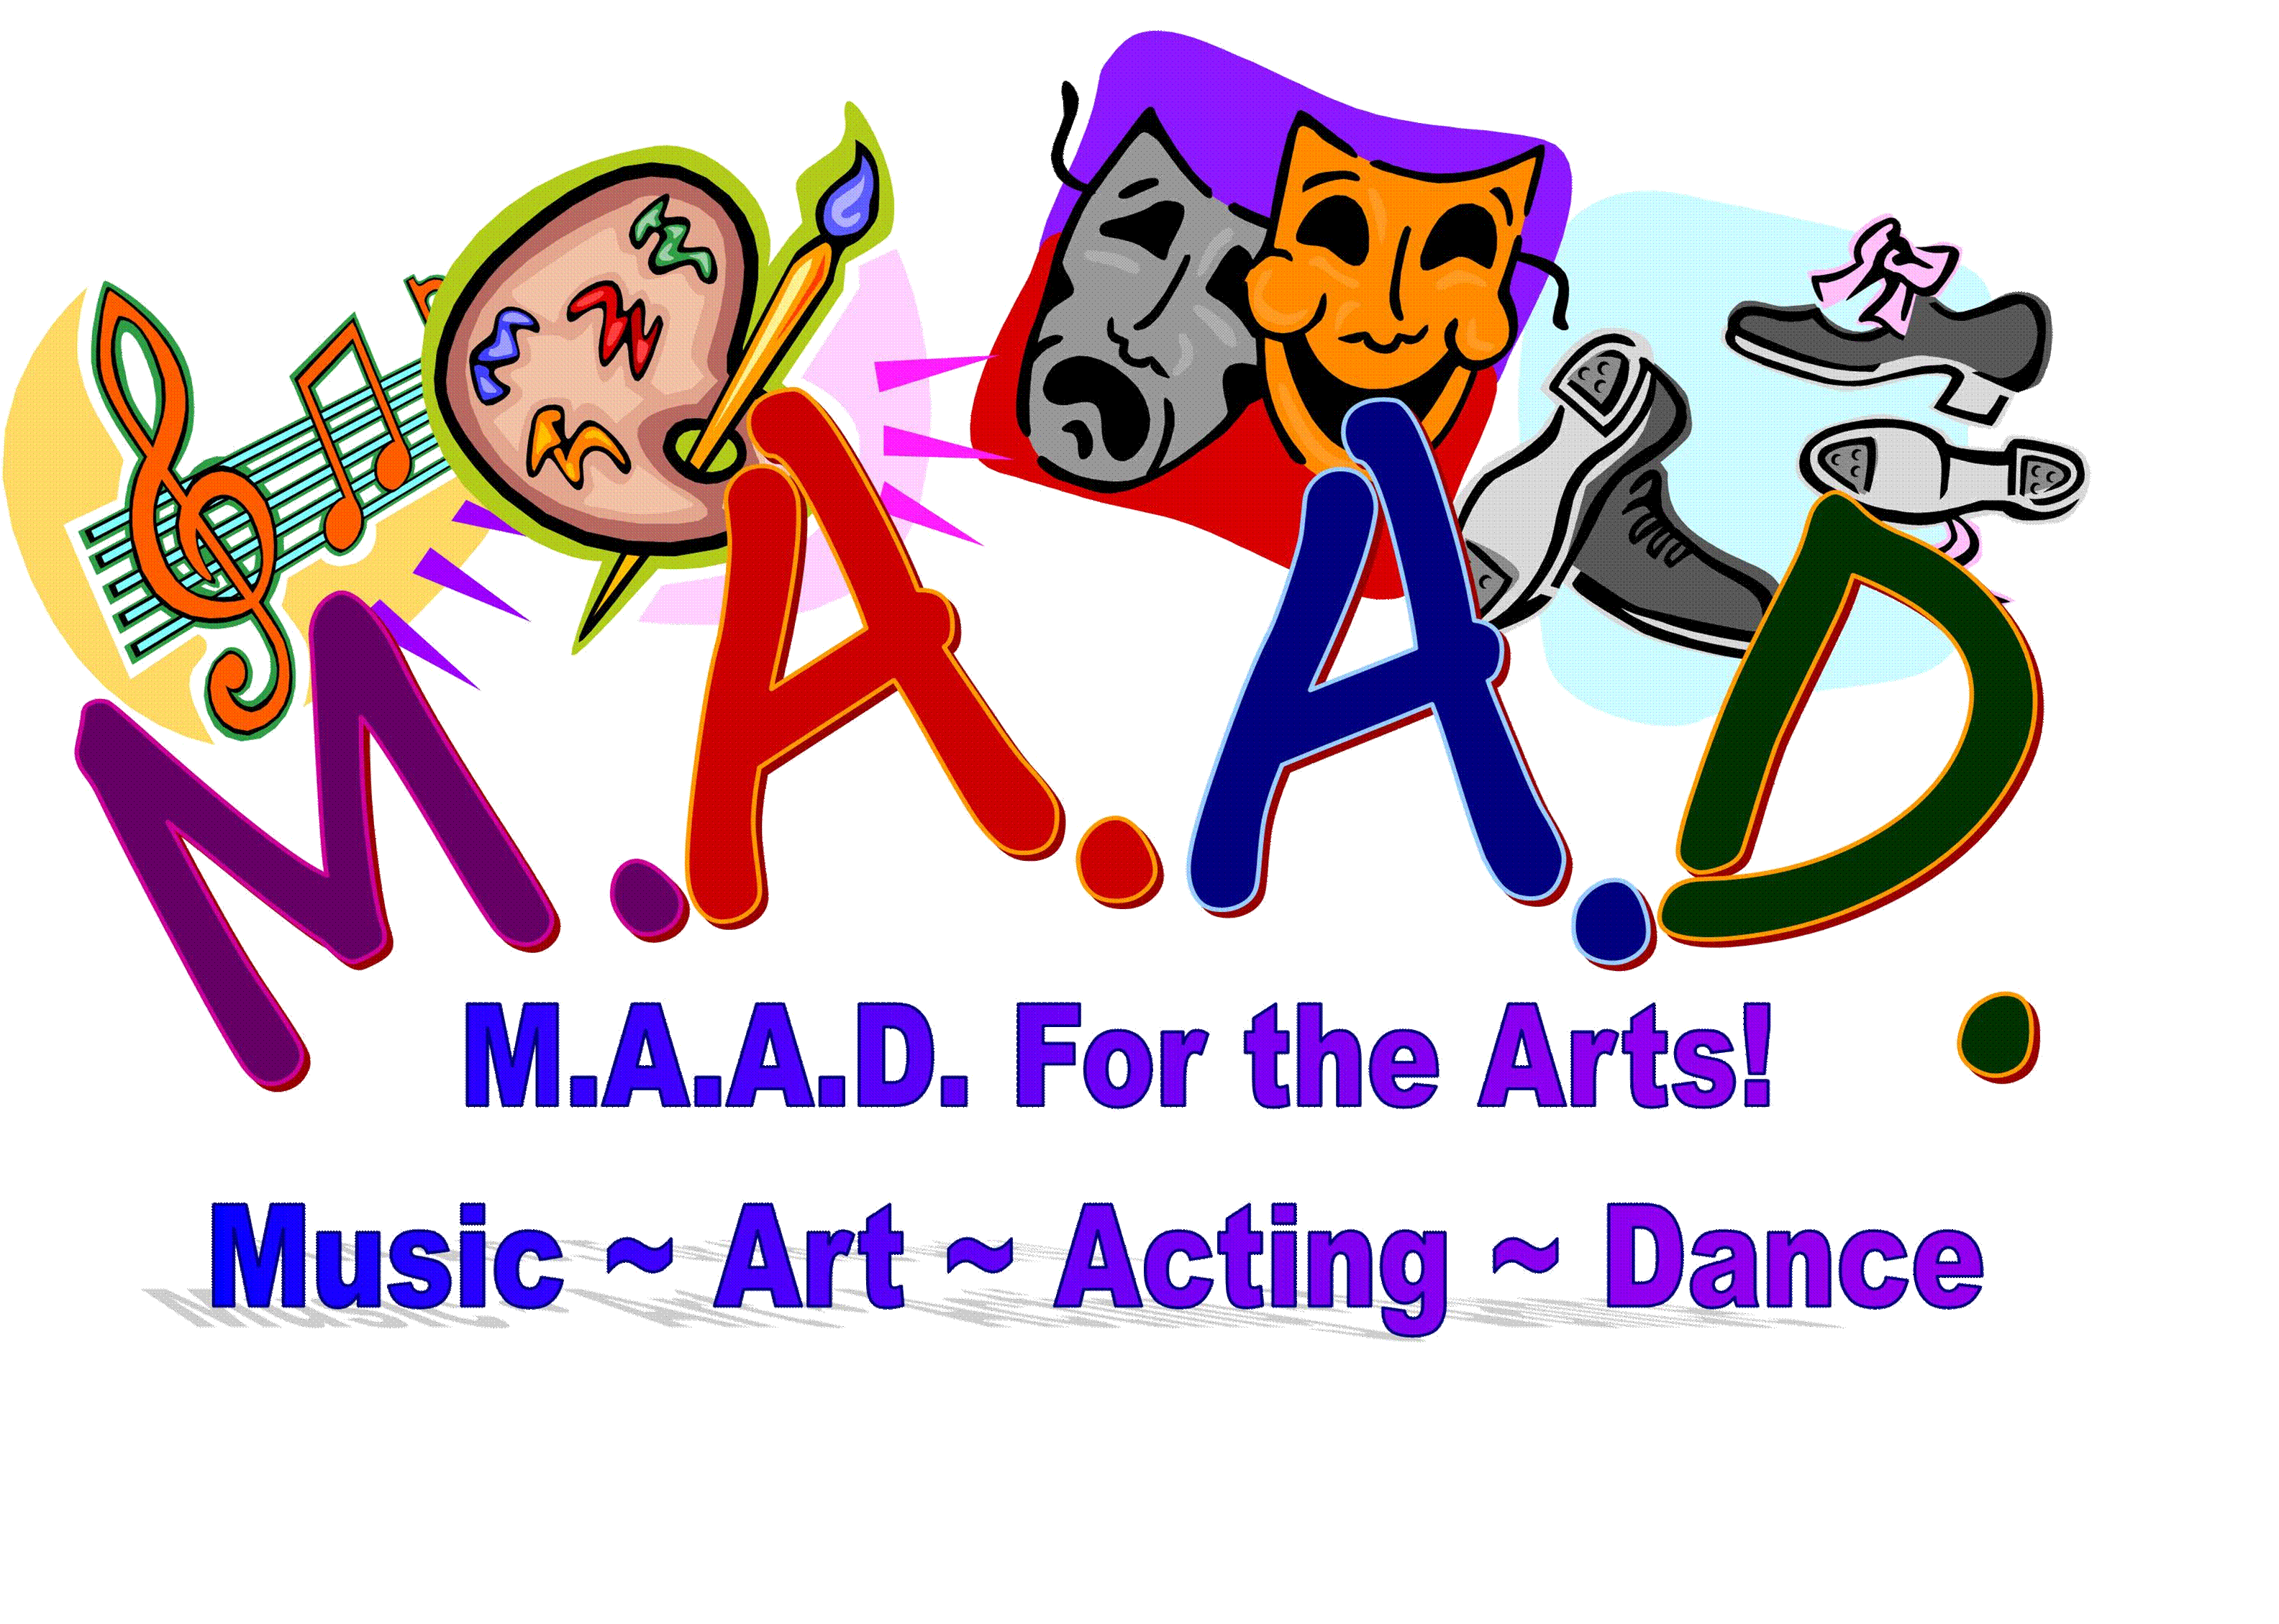 Click image to go to MAAD Academy Page 